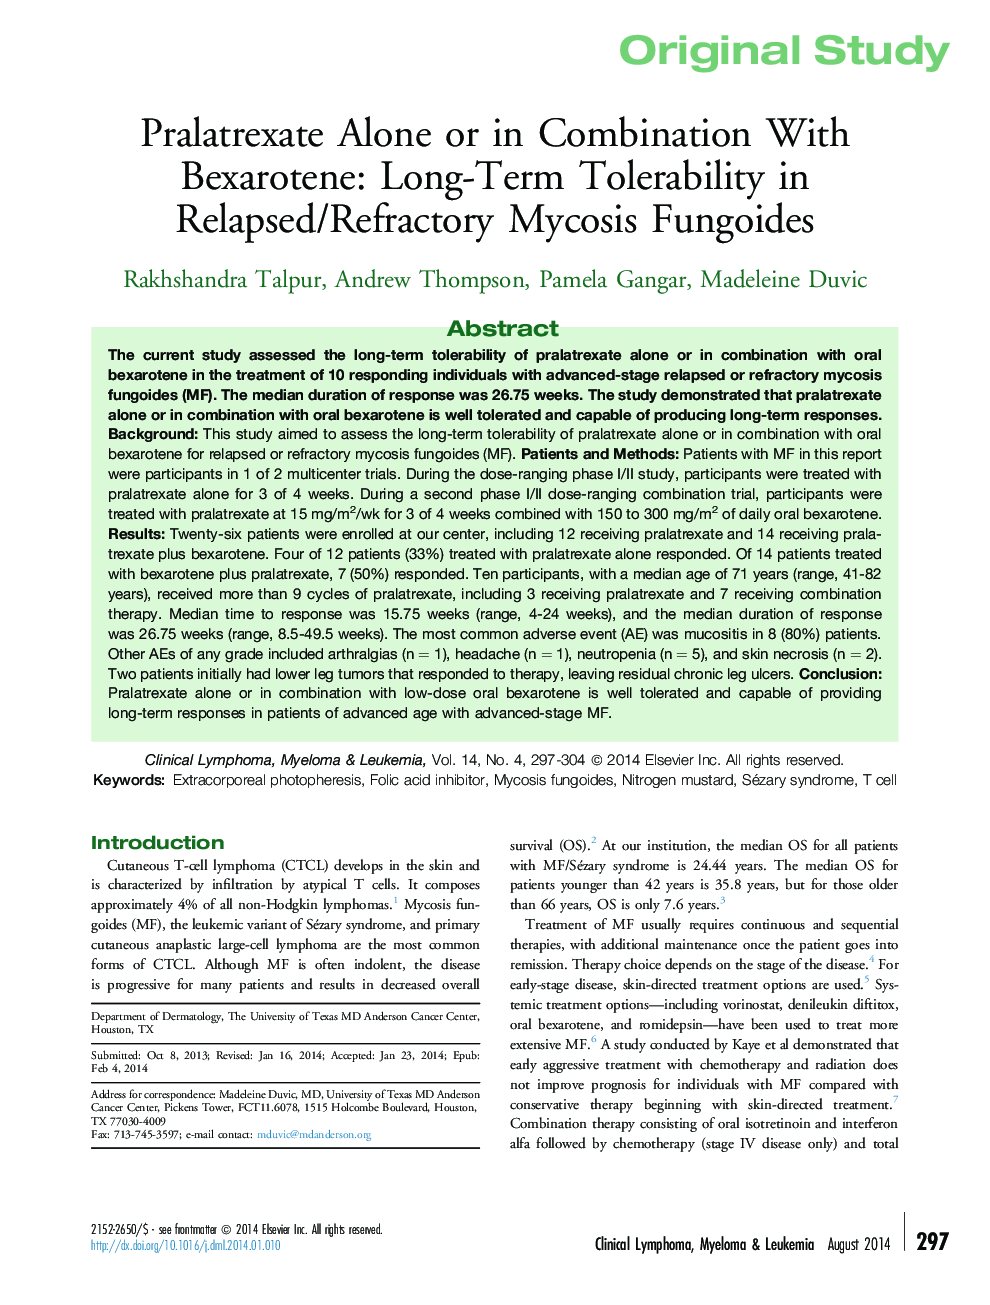 Original StudyPralatrexate Alone or in Combination With Bexarotene: Long-Term Tolerability in Relapsed/Refractory Mycosis Fungoides